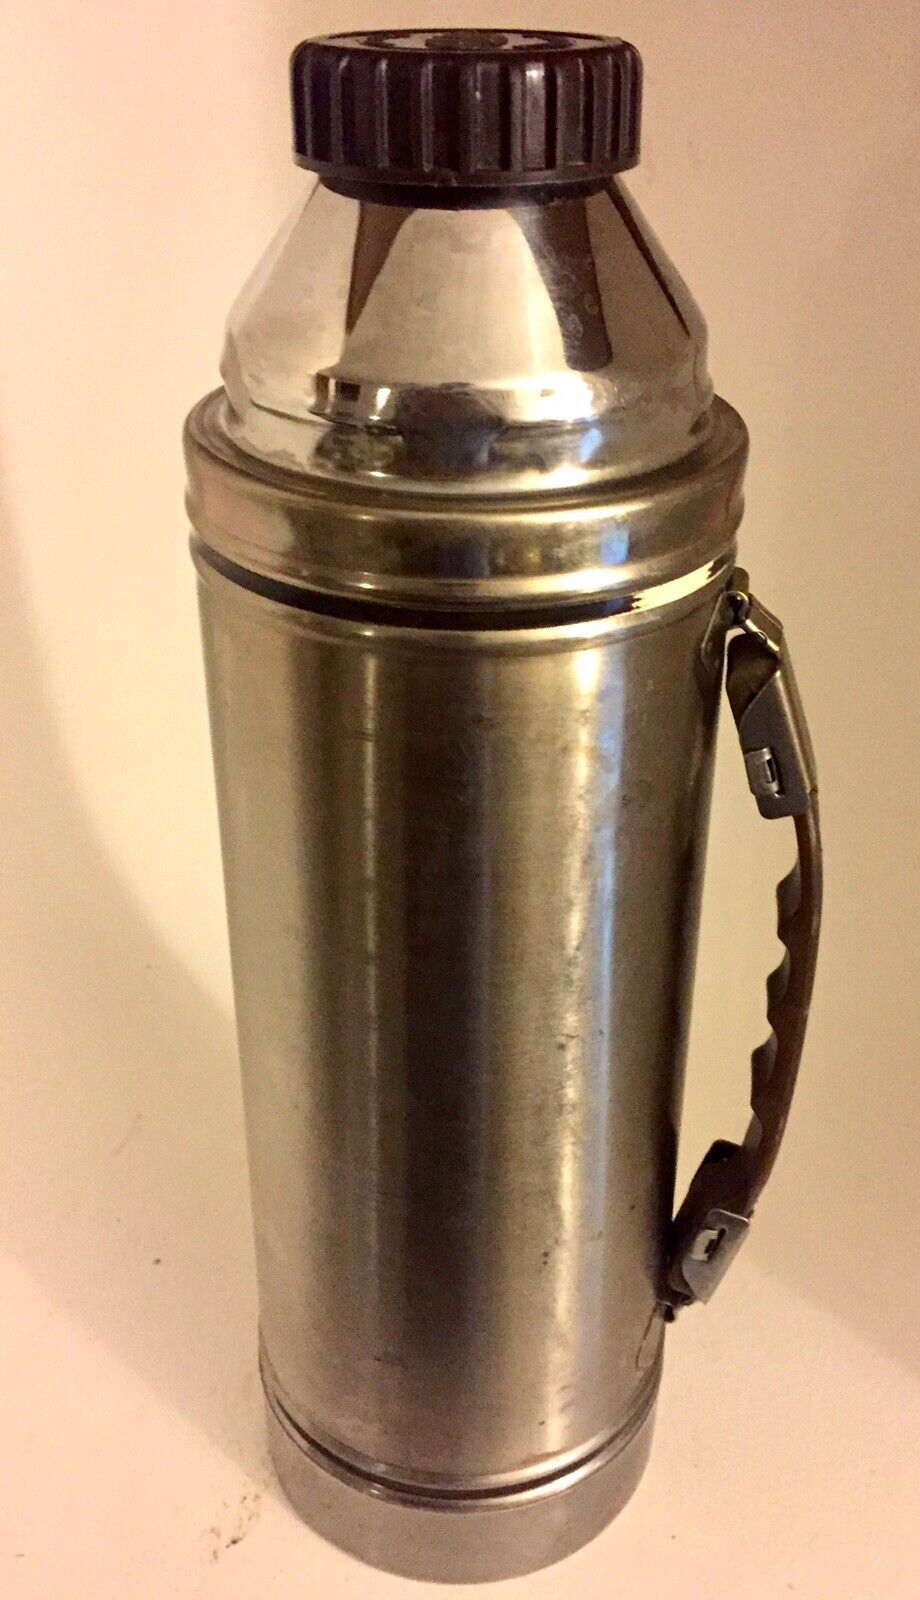 Thermos Champ Stainless Steel Unbreakable Hot Cold 